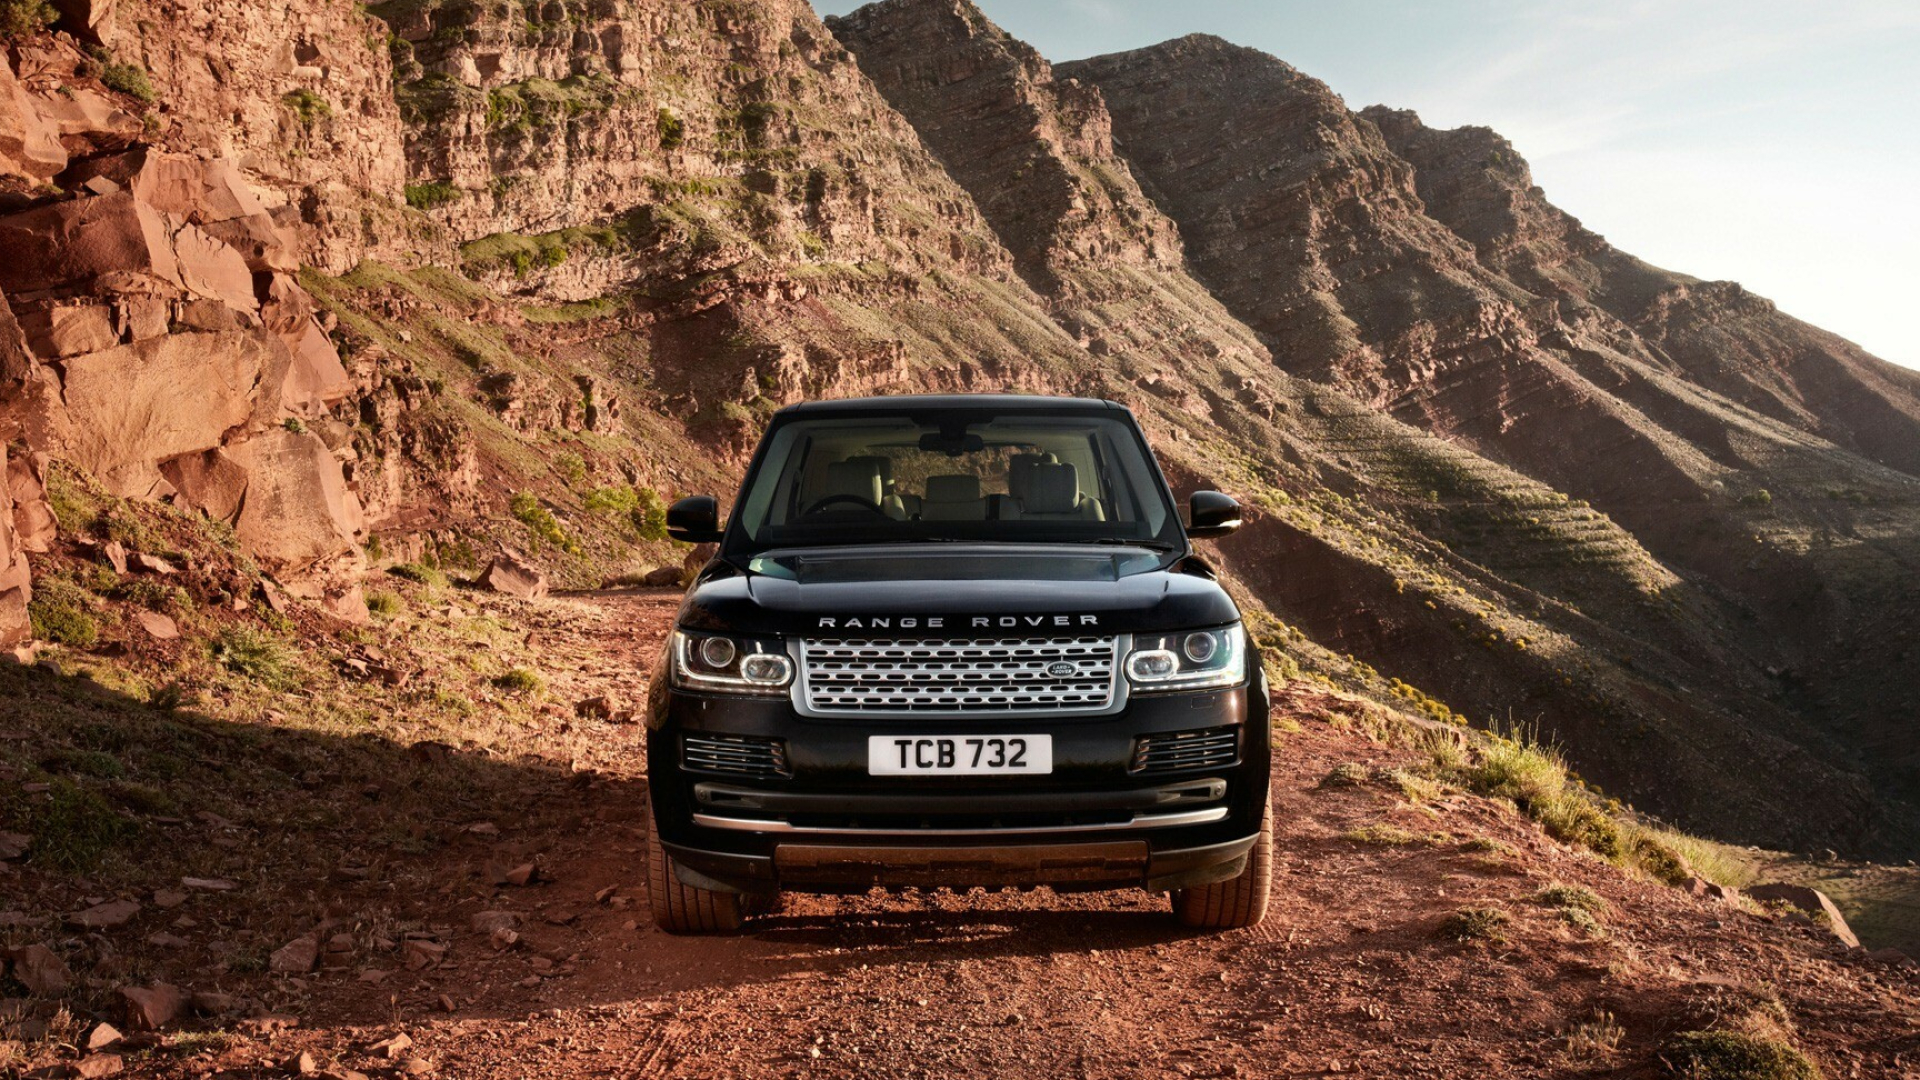 Range Rover: Model Vogue, The brand's cars used to win the 1979 inaugural and 1981 Paris–Dakar Rally. 1920x1080 Full HD Background.